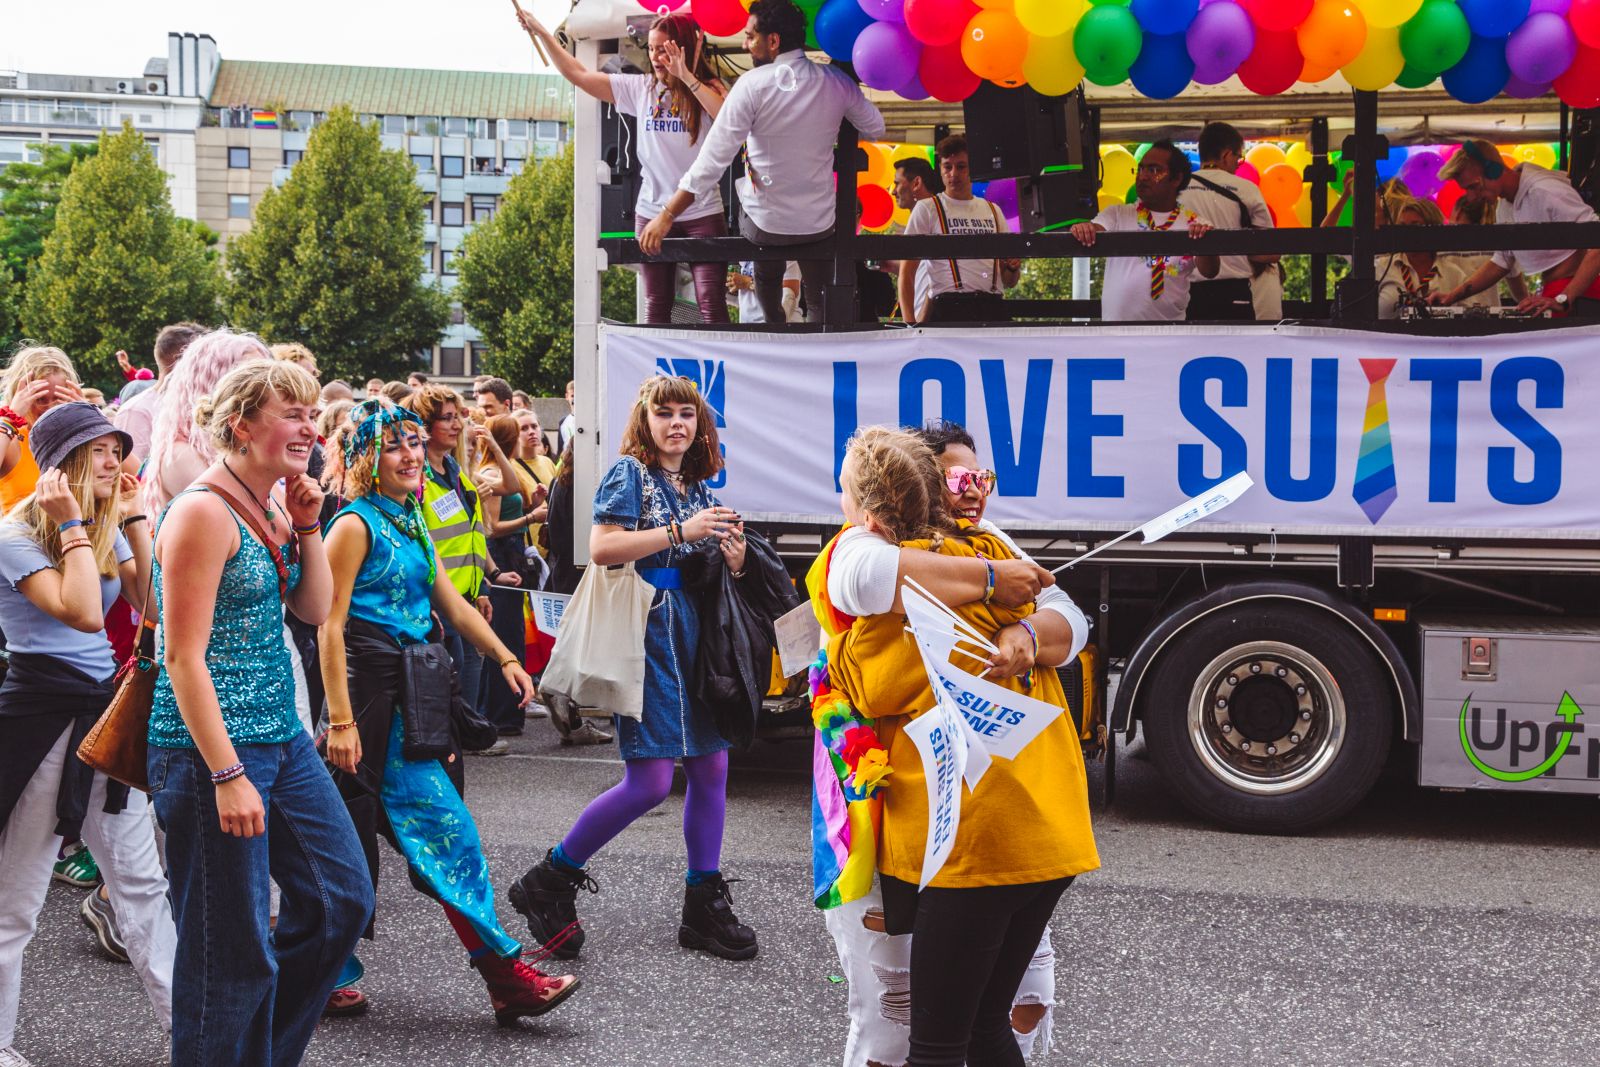 Fabulous Gallery Cbs Joined Copenhagen Pride Parade For The Third Time It Was Quite A Party